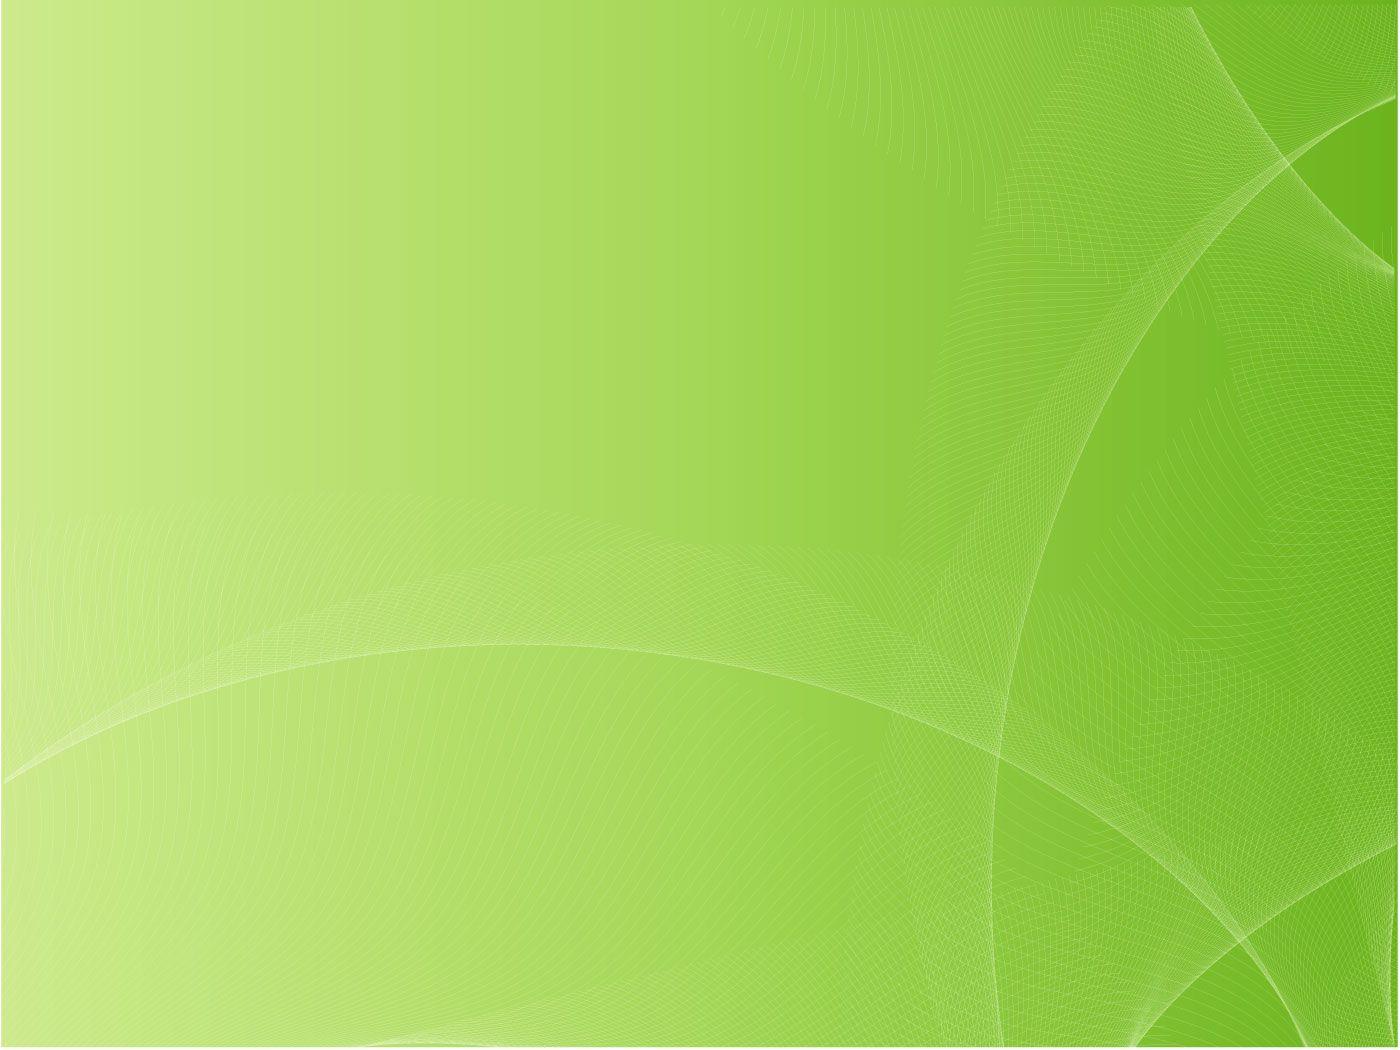 The Color Light Green HD Wallpaper, Background Image